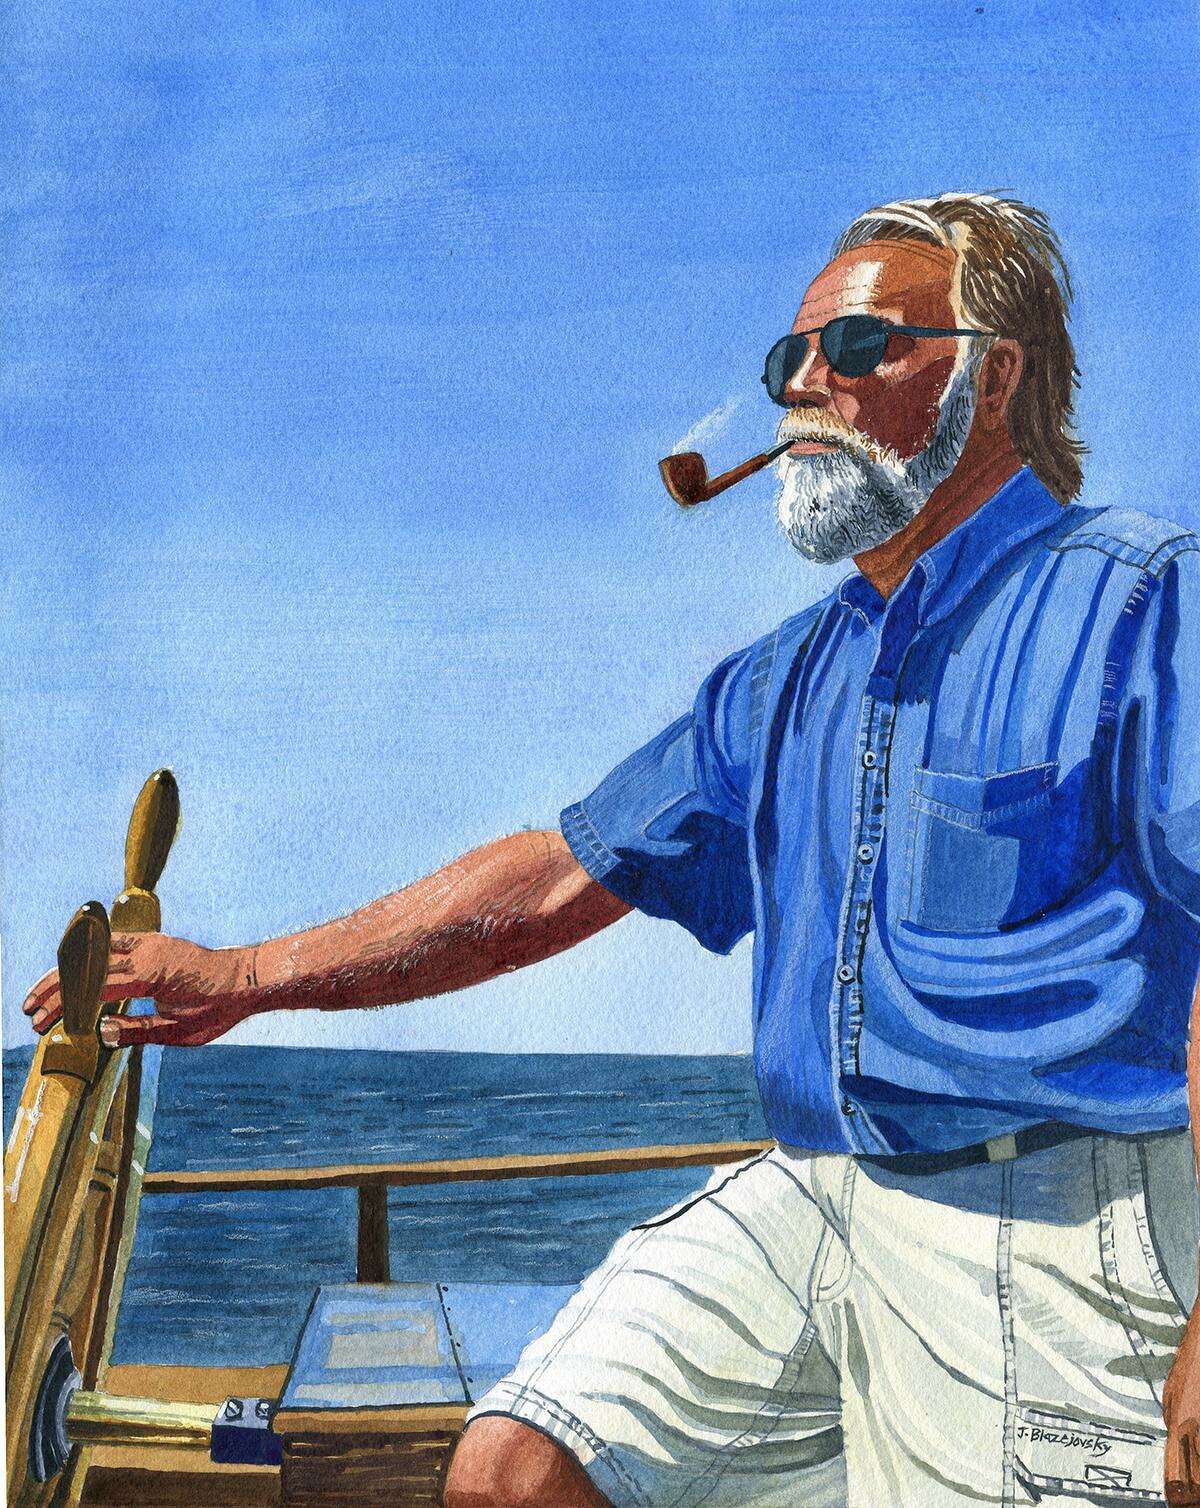 SPECTRUM ART: Spectrum Art Gallery and Store of Centerbrook at 61 Main St. in Essex presents the Summer Arts Festival Gallery Show through July 14, an exhibit of select works by artists participating in the upcoming Summer Arts Festival on the Essex Town Green. A mixture of paintings, such as the watercolor “The Captain,” above, as well as mixed media, photography and a variety of original jewelry designs, along with fine crafts made from glass, ceramic, porcelain and fabric will be exhibited.